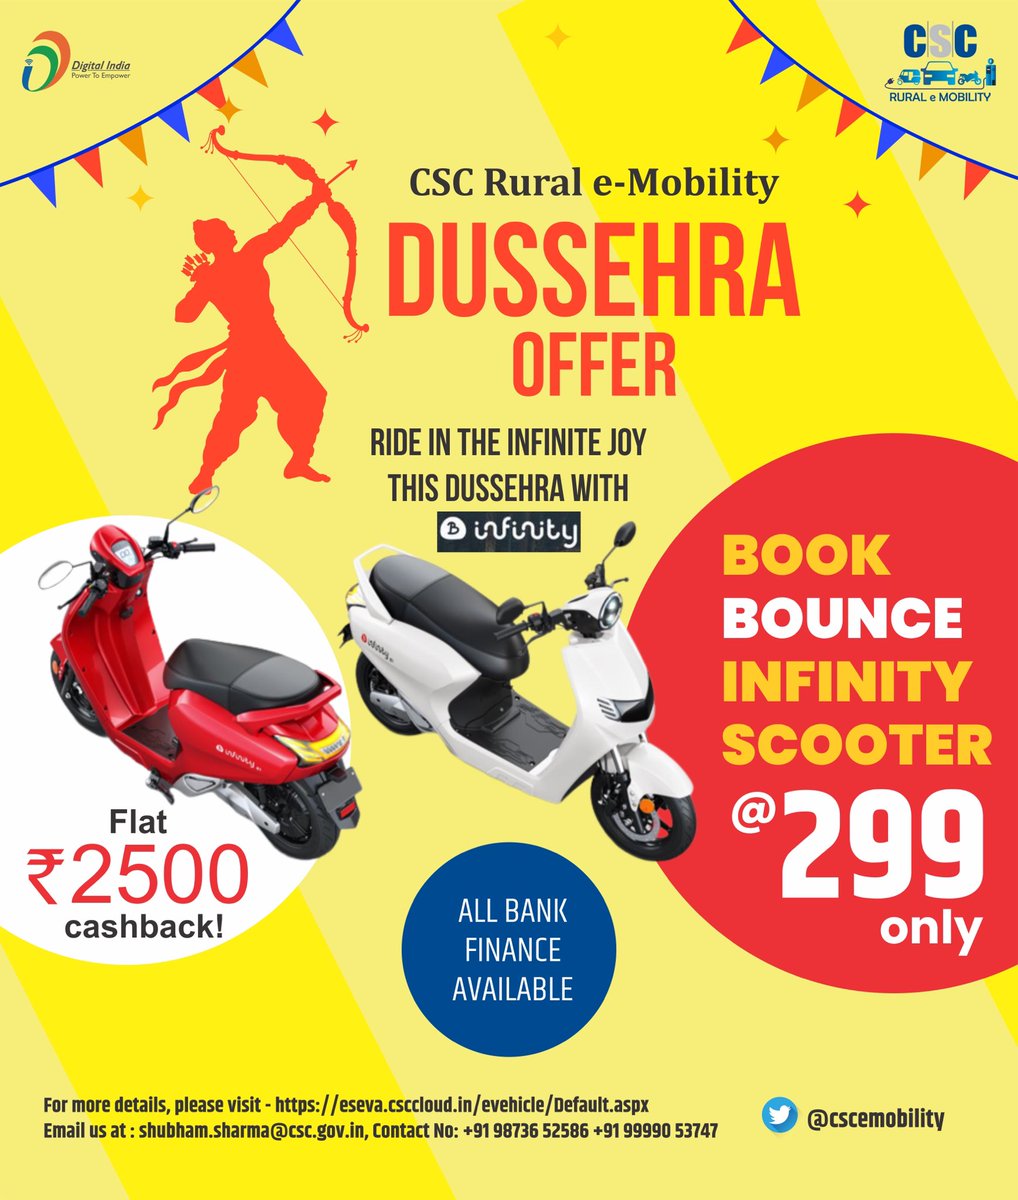 Book 15-20 e-bikes and get Rs.2500/- discount on each ebike!!! Hurry offer valid till 10th October 2022 only…become #CSCeMobility Dealer from #BounceElectric take your business to new heights…#CSCeGov_ #ceo_csc #PollutionSeAzadi #DiwaliTreats